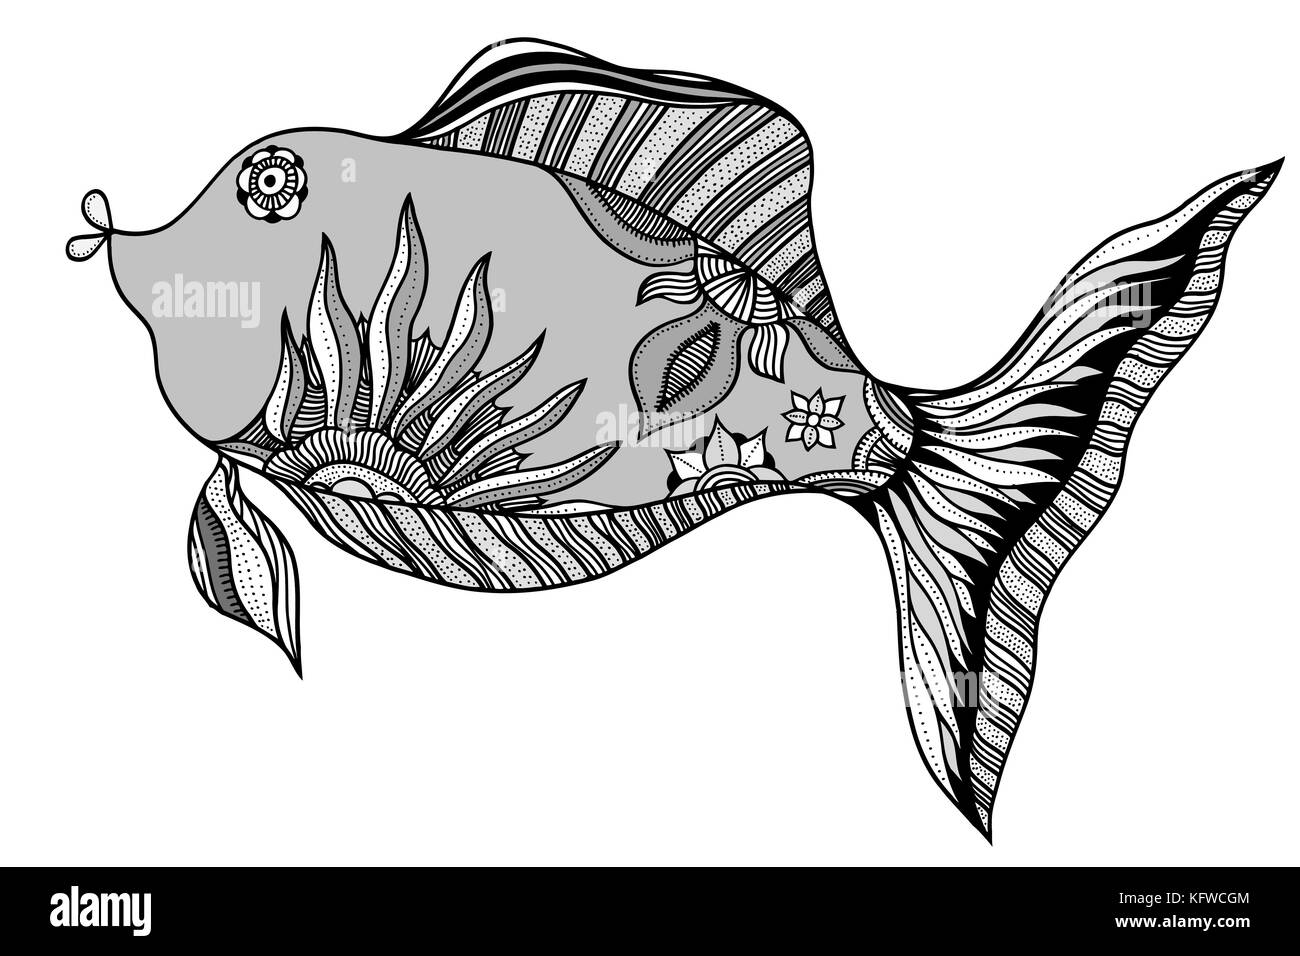 Hand drawn vector fish with floral elements in black and white doodle ...